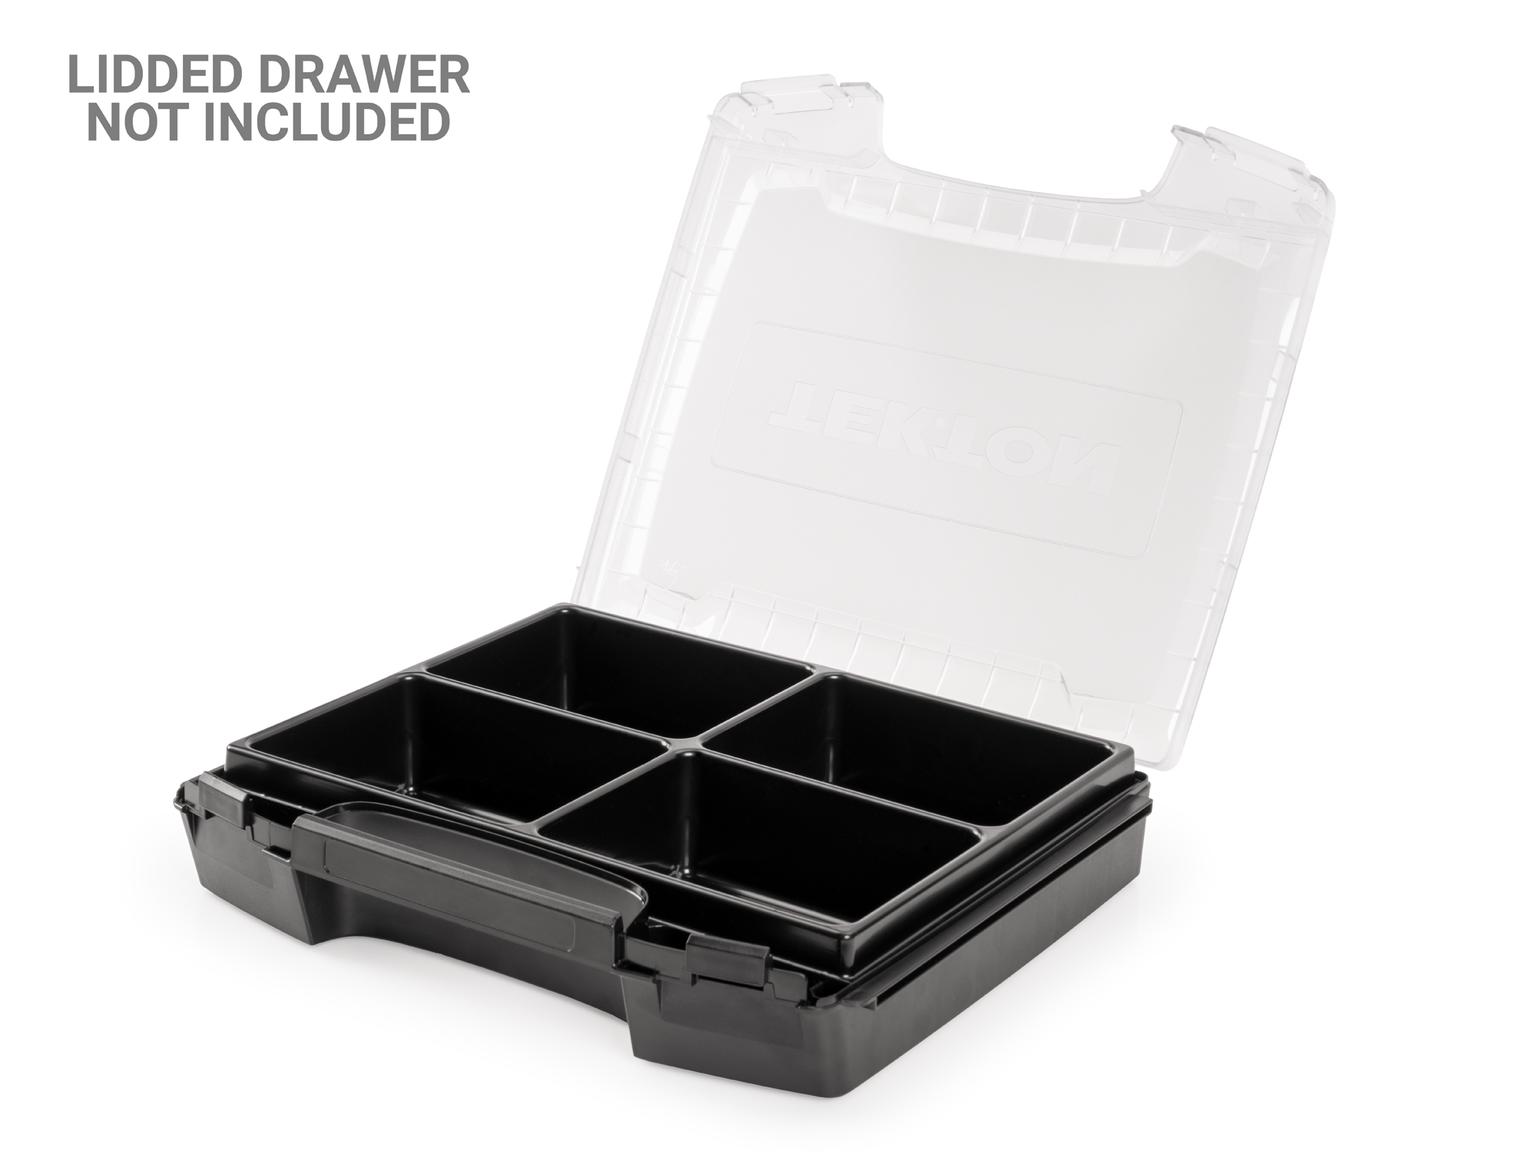 TEKTON OLB81304-T 4-Cavity Parts Tray for Lidded Drawer and Open Top Drawer